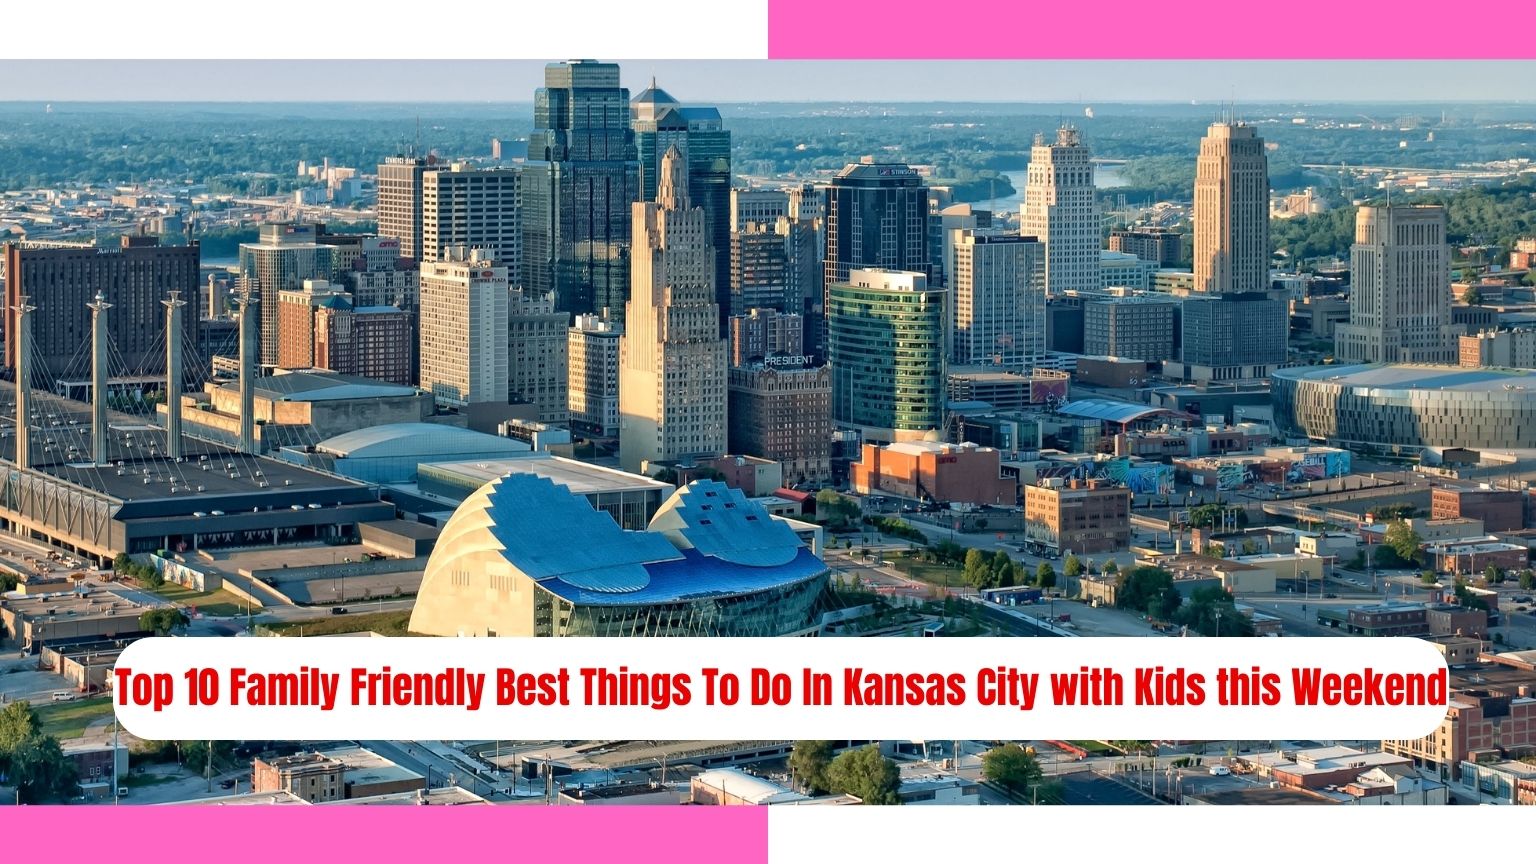 Top 10 Family Friendly Best Things To Do In Kansas City with Kids this Weekend